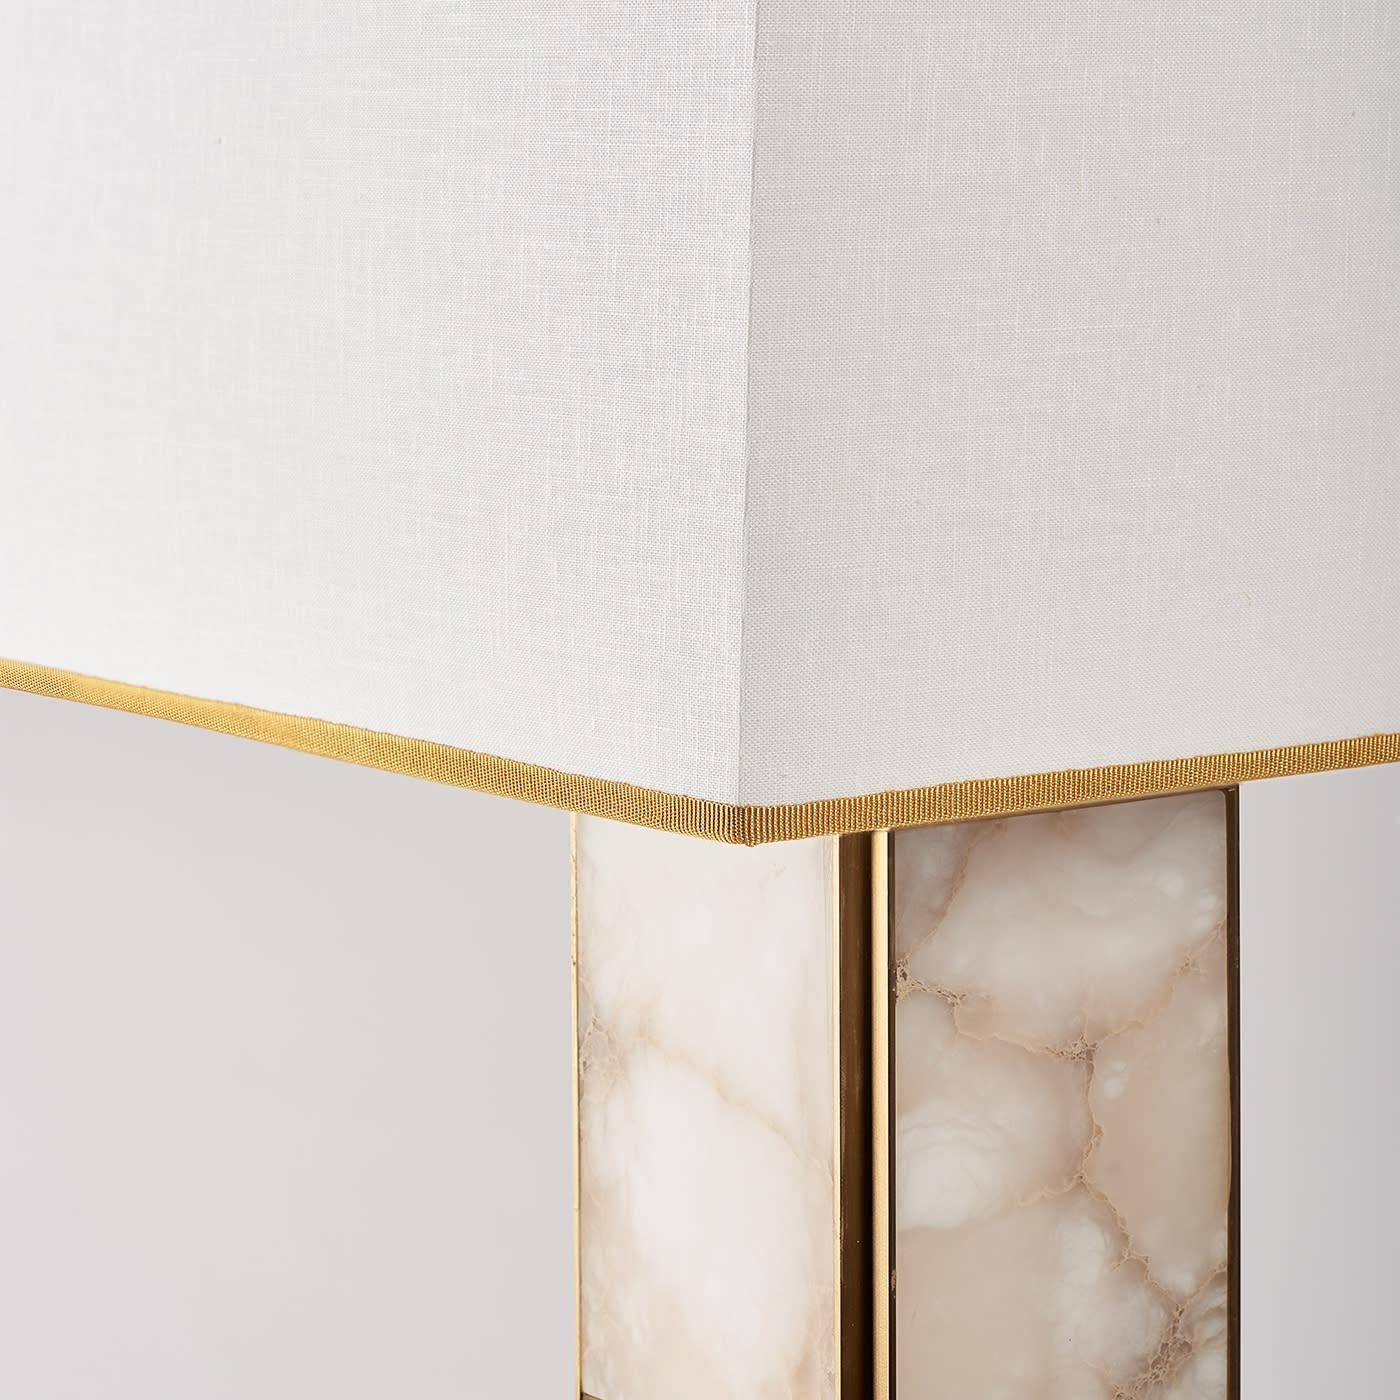 The Mole table lamp is characterized by a monolithic linear structure in brass and veined alabaster which gives it a modern and timeless aesthetic, perfect for different interior styles. Satin brass adds a touch of sophistication and warmth, while